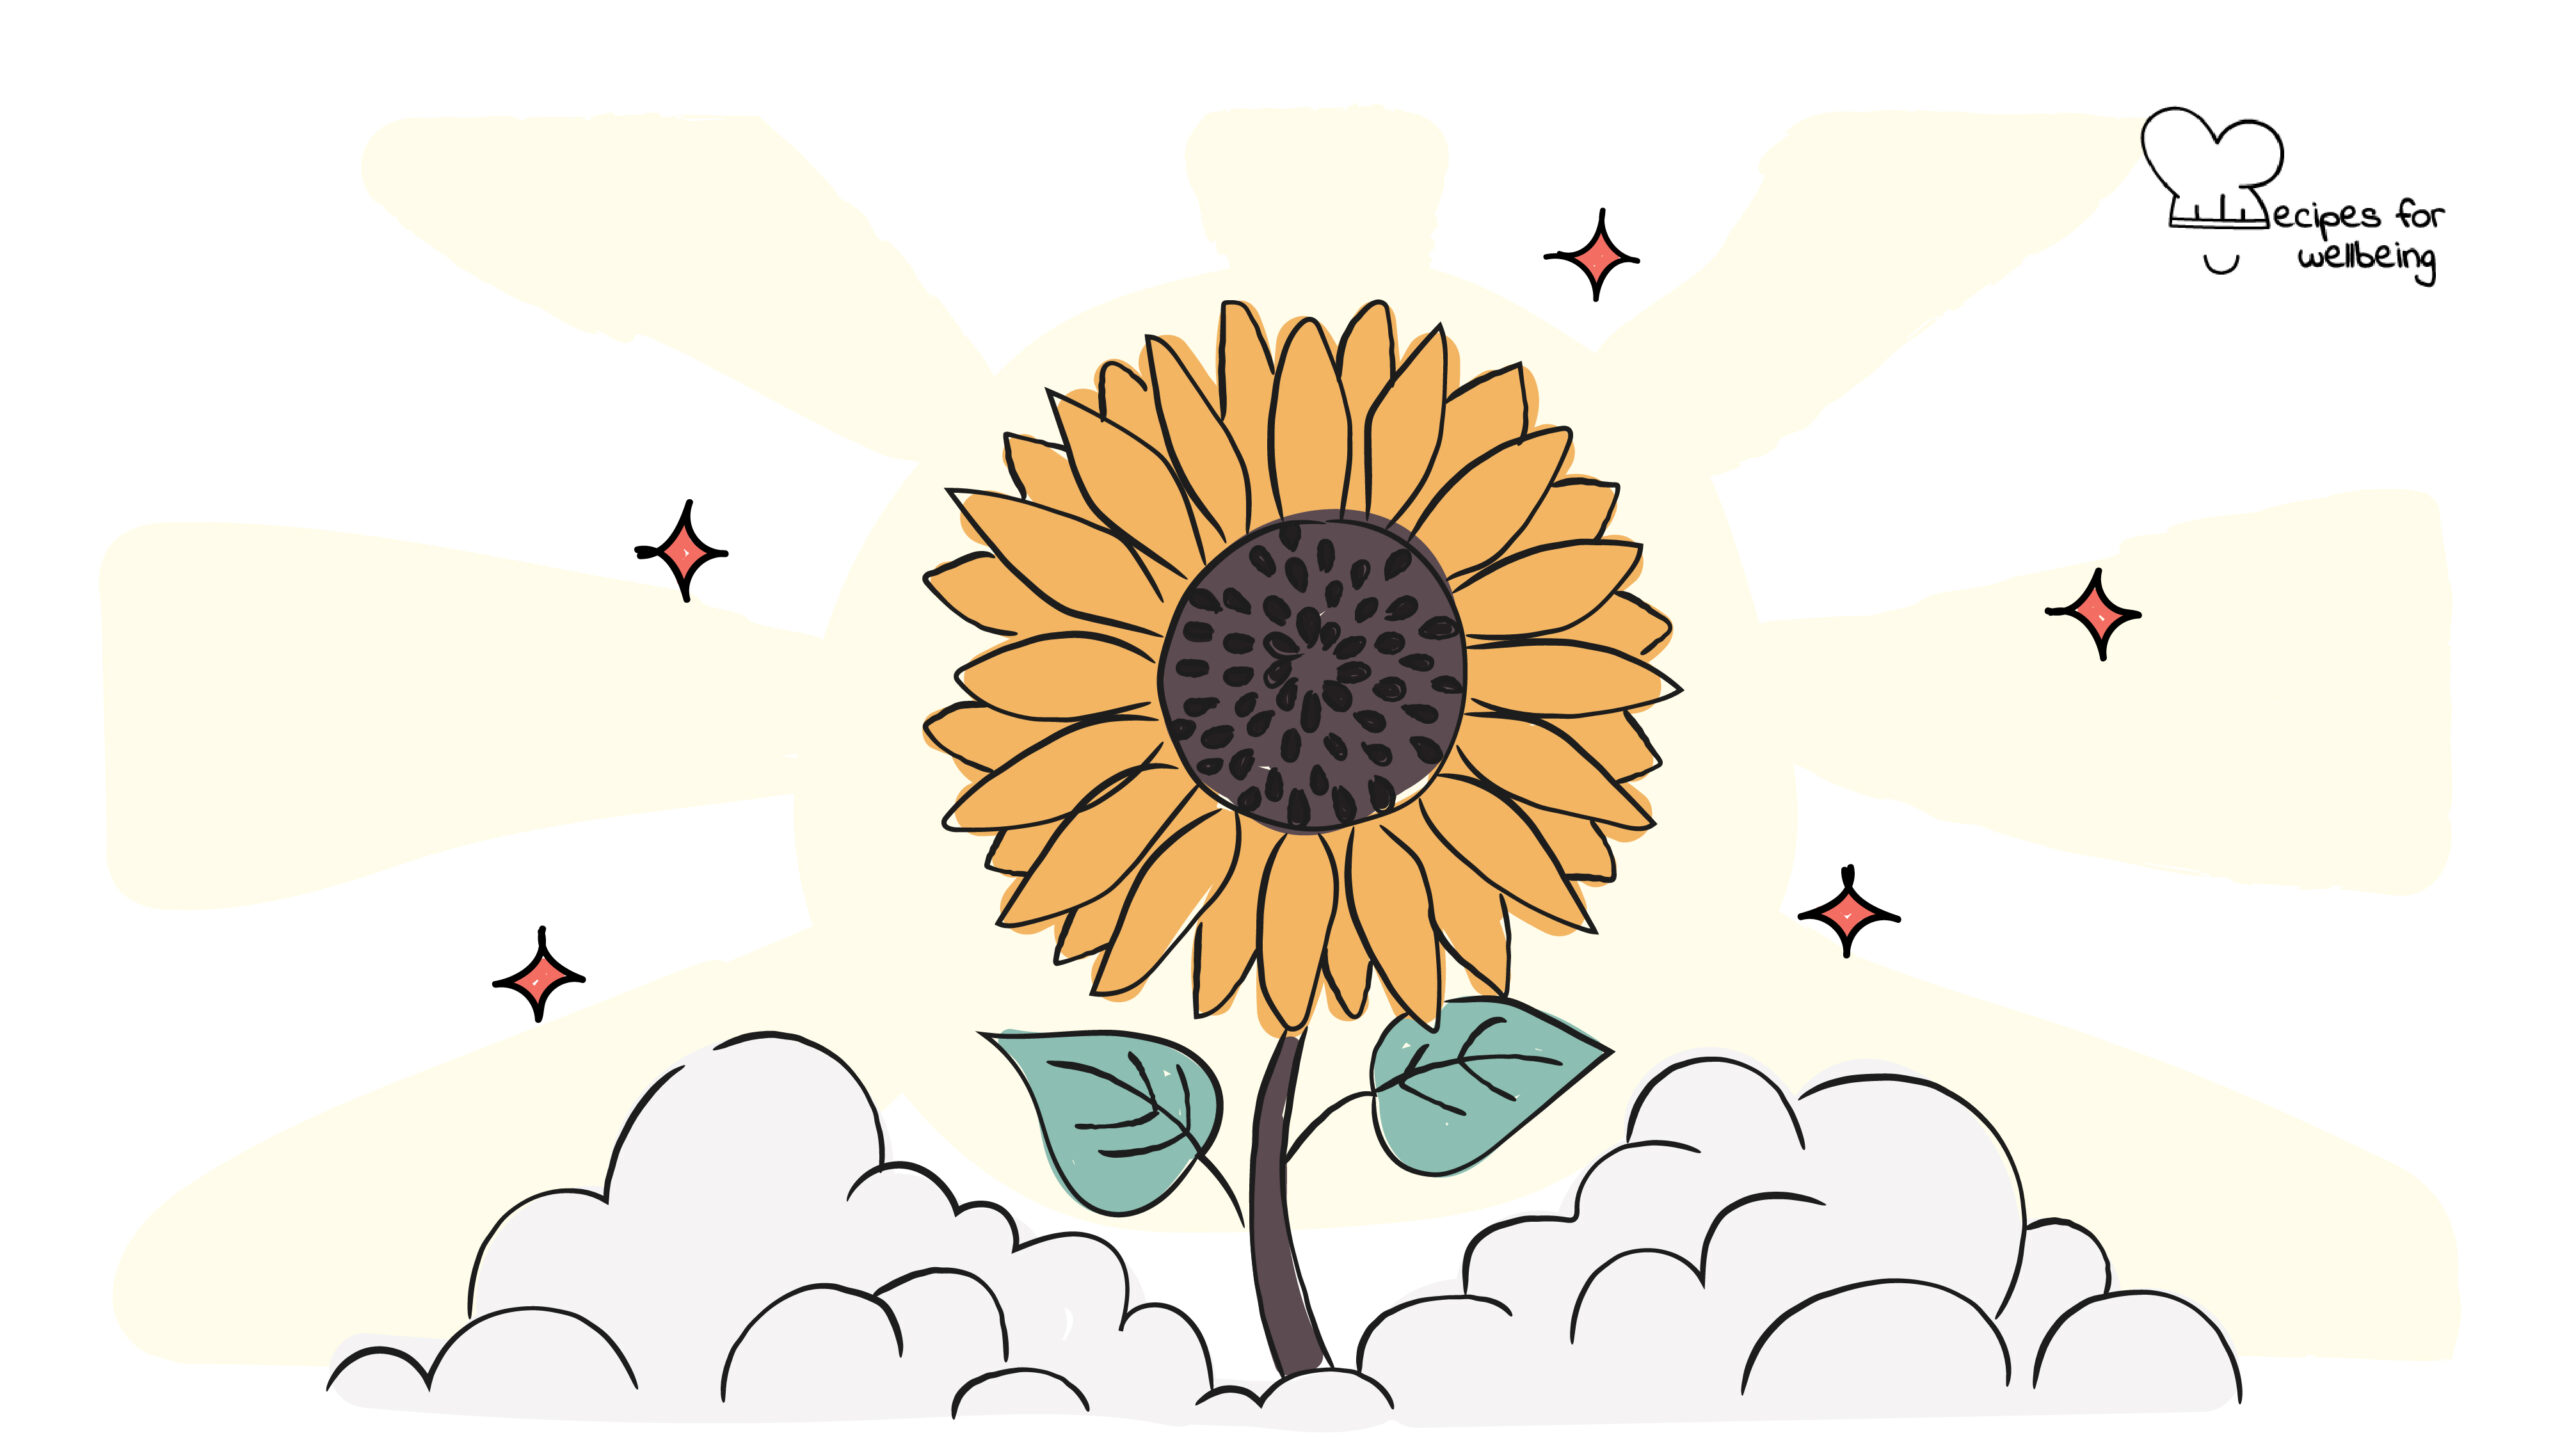 Illustration of a sunflower. © Recipes for Wellbeing